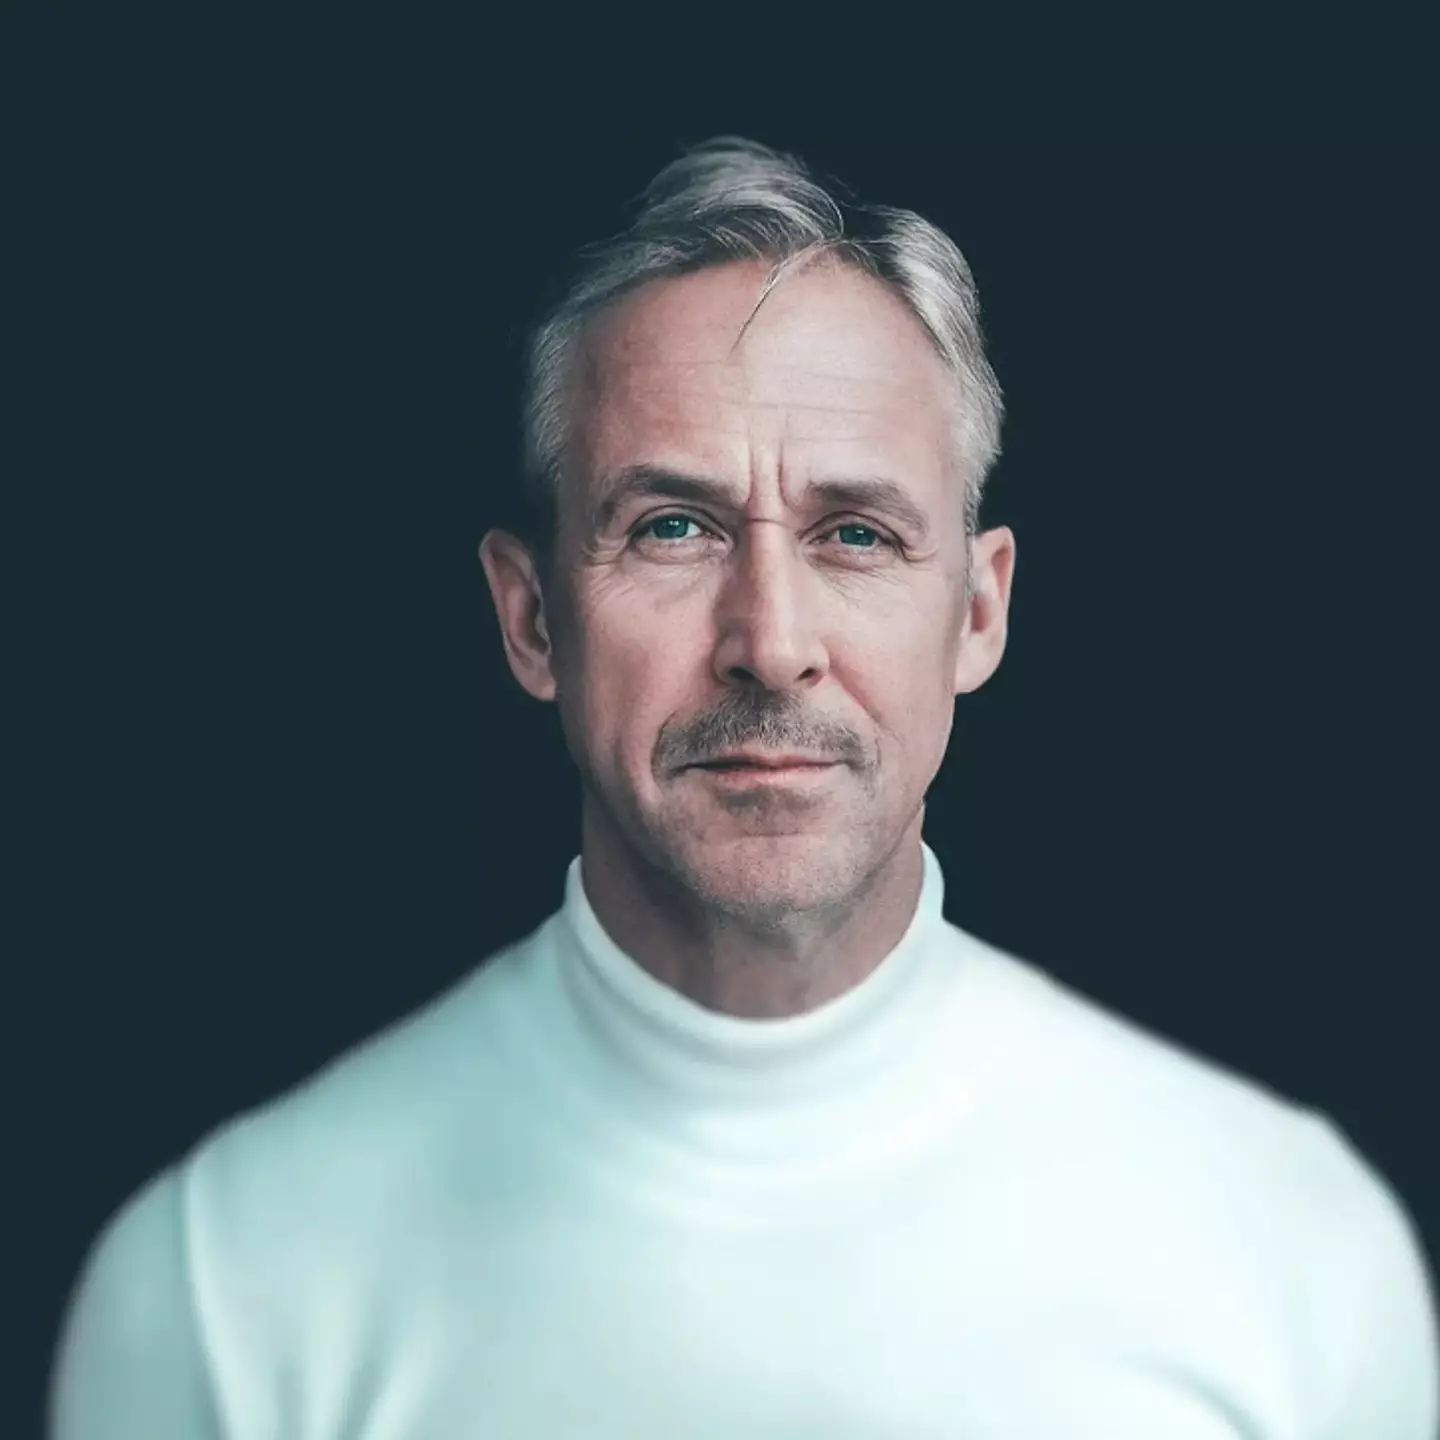 Do you think Ryan Gosling will look like this in 40 years.